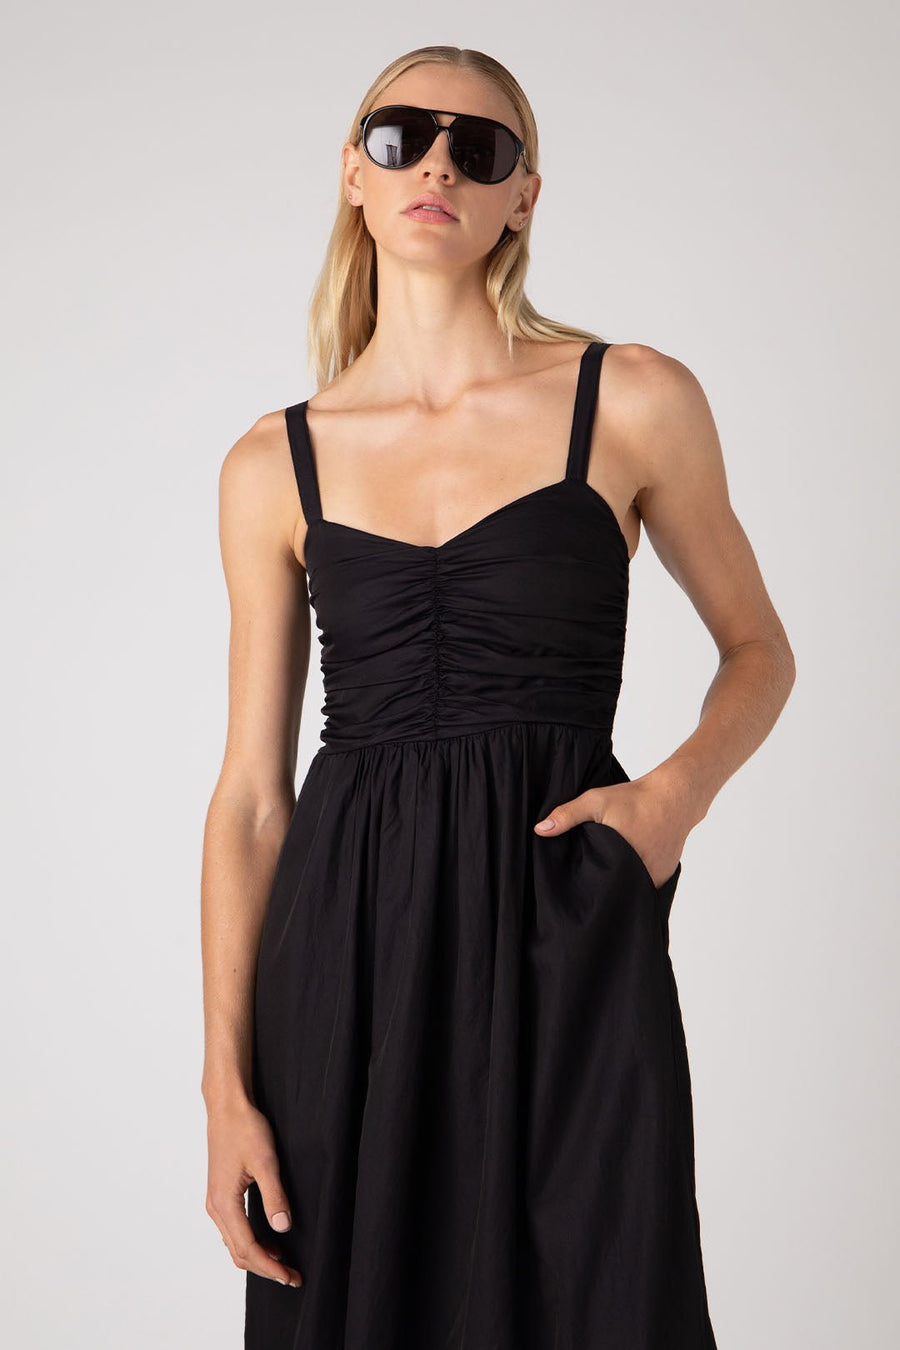 BRYCE RUCHED BODICE DRESS, BLACK - Burning Torch Online Boutique